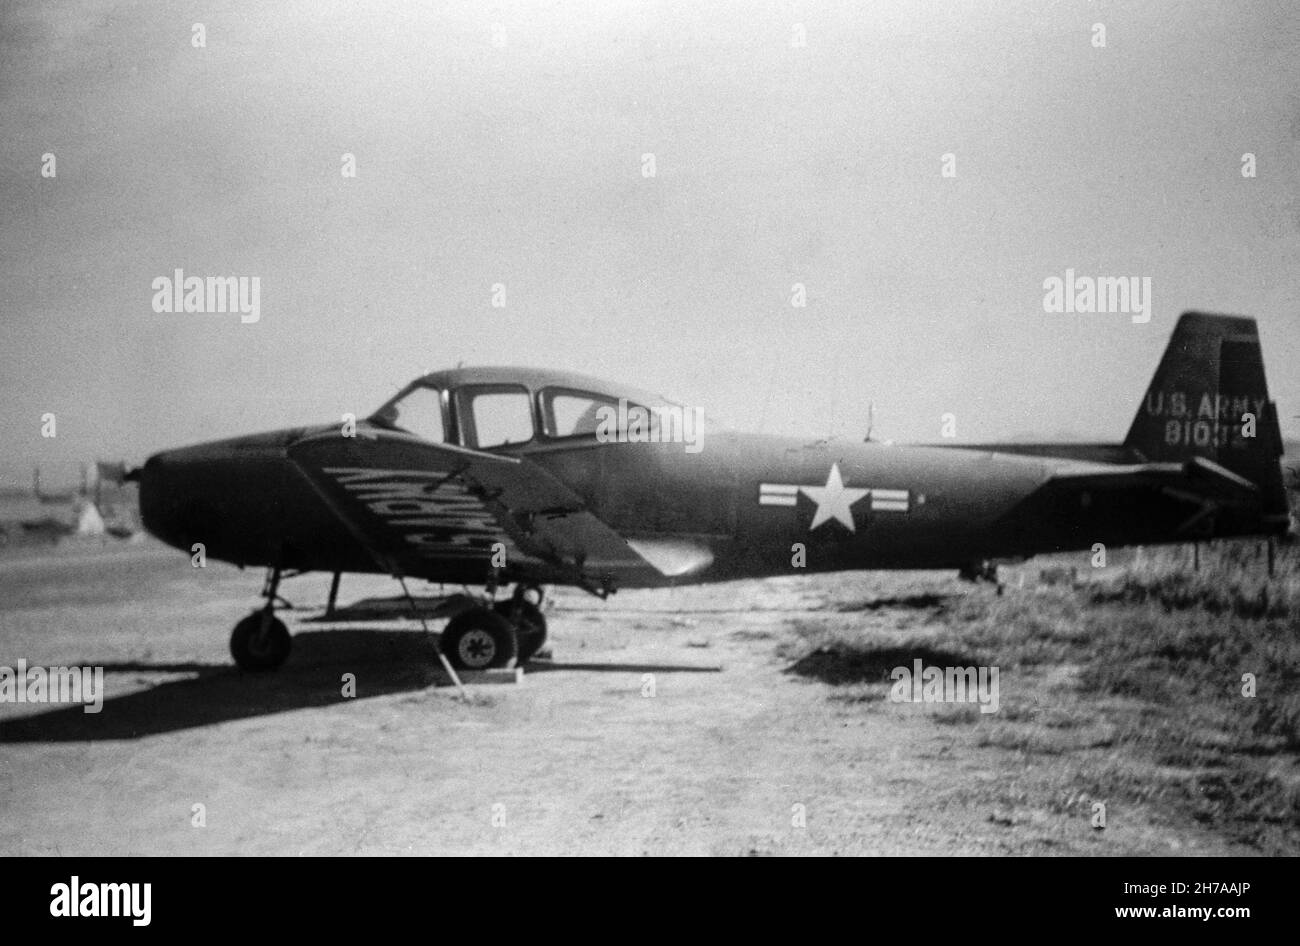 A photograph of a Ryan L-17B Navion aircraft, serial number 48-1032, of the United States Army, taken at Airstrip A-33, during the Korean War, in 1953 or 1954. Stock Photo